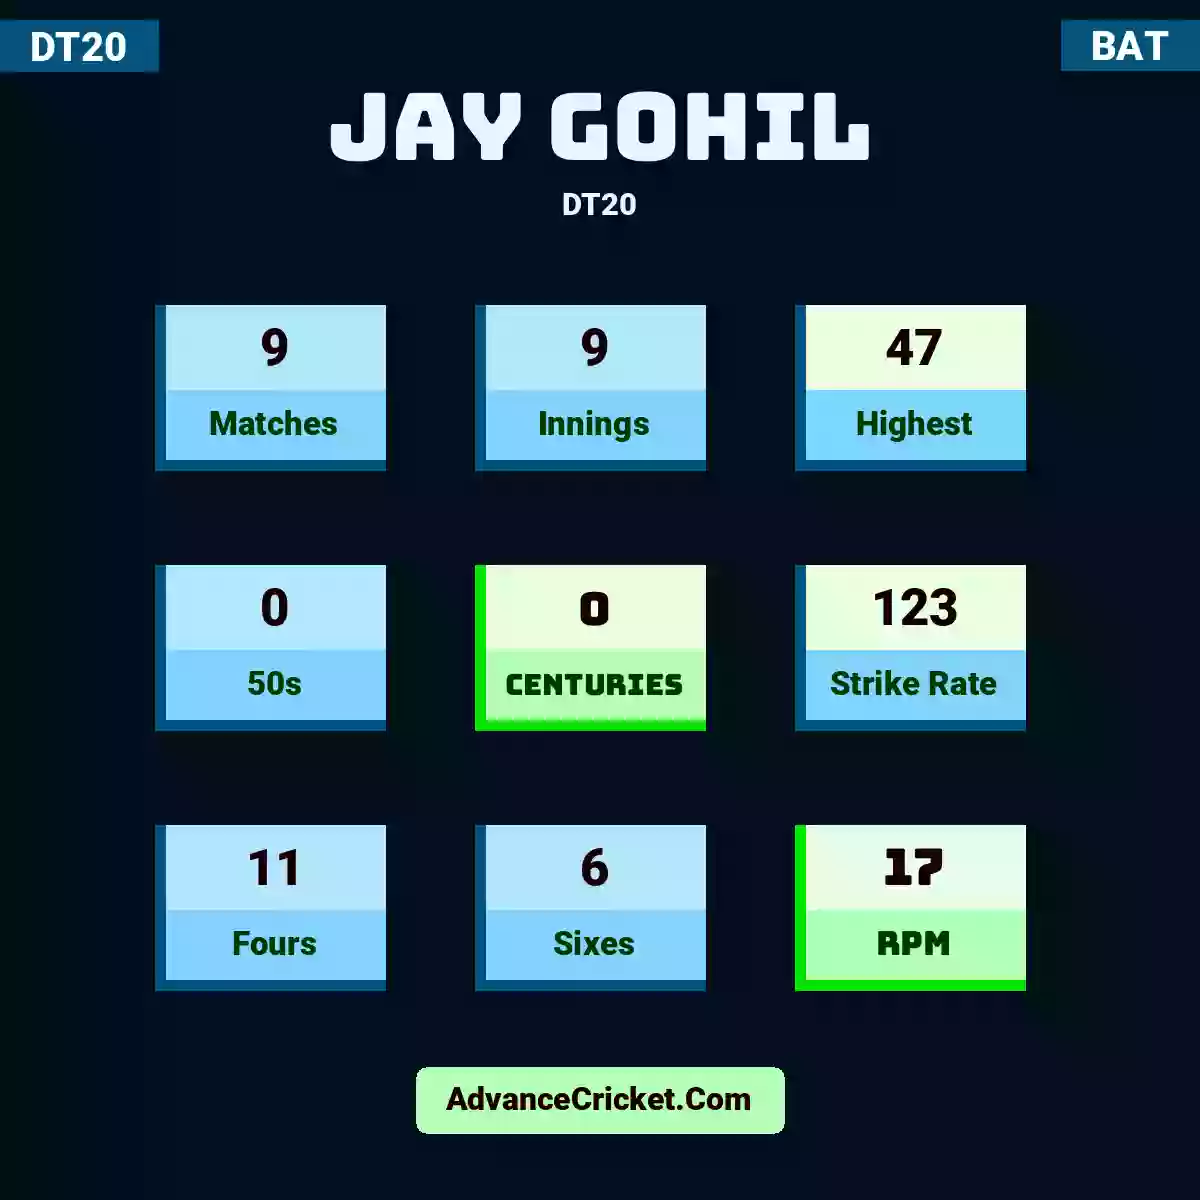 Jay Gohil DT20 , Jay Gohil played 9 matches, scored 47 runs as highest, 0 half-centuries, and 0 centuries, with a strike rate of 123. J.Gohil hit 11 fours and 6 sixes, with an RPM of 17.